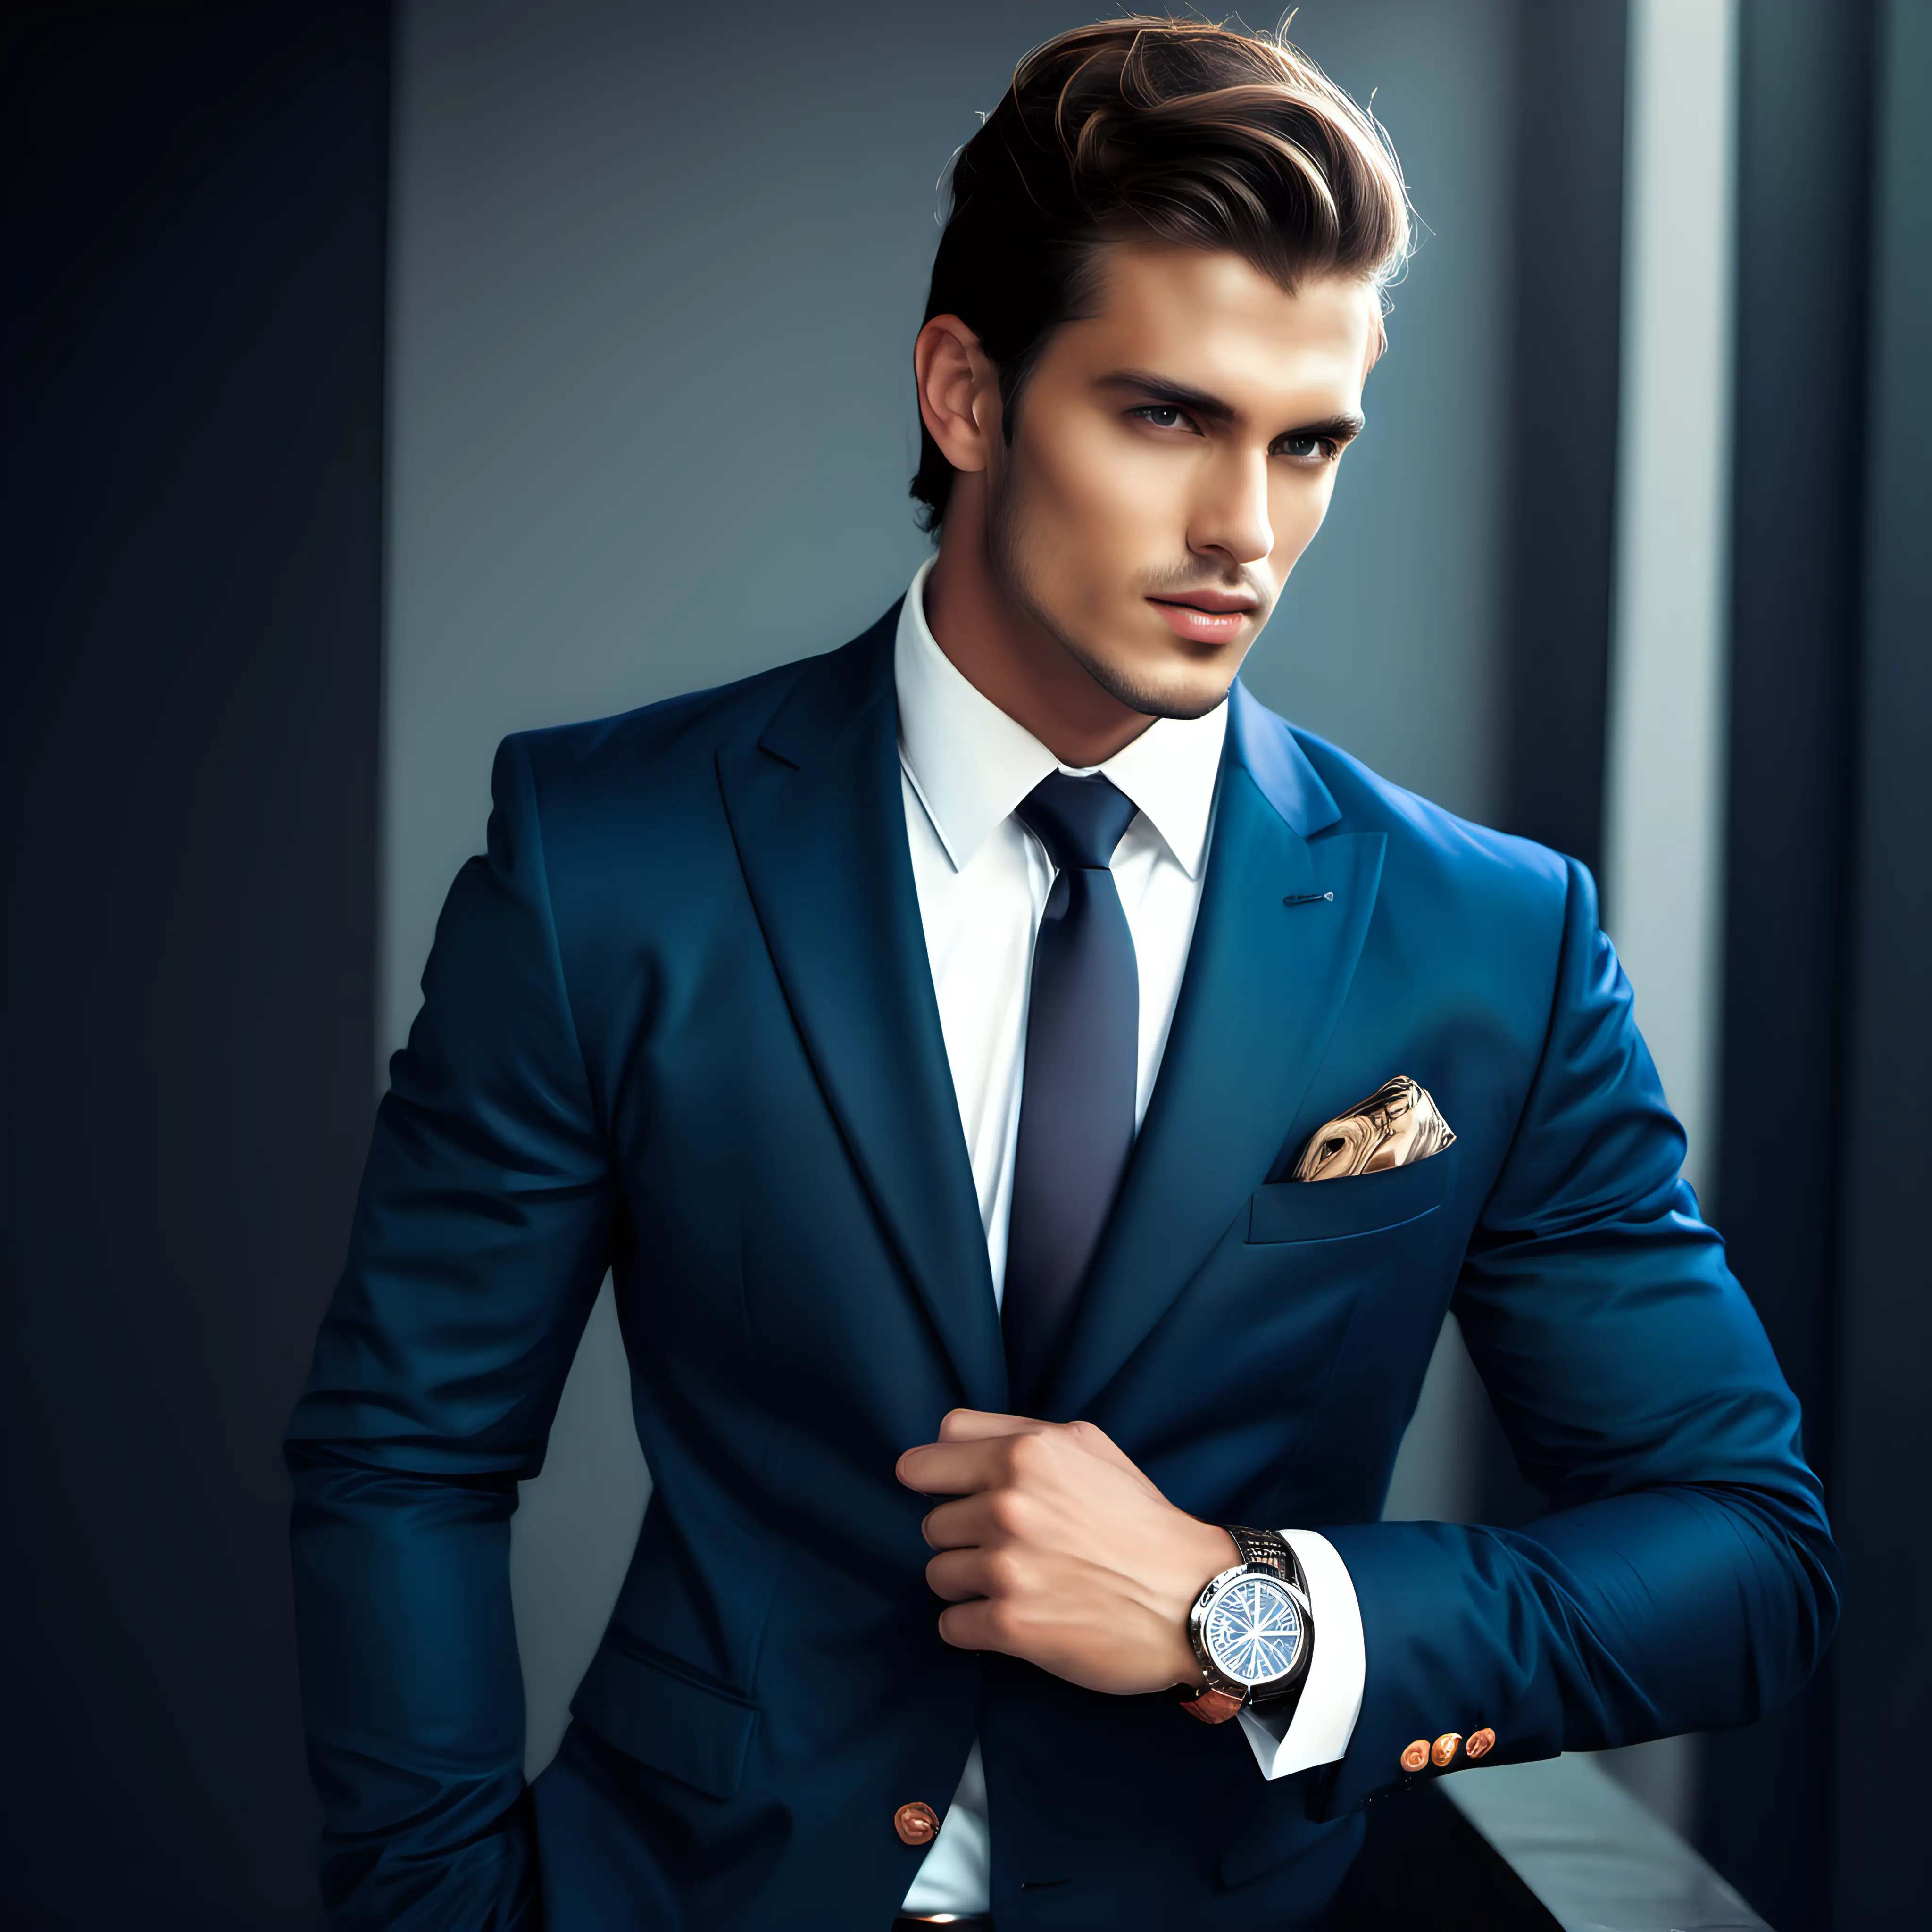 Elegant Business Attire Handsome Male Model Wearing a Stylish Suit and Watch